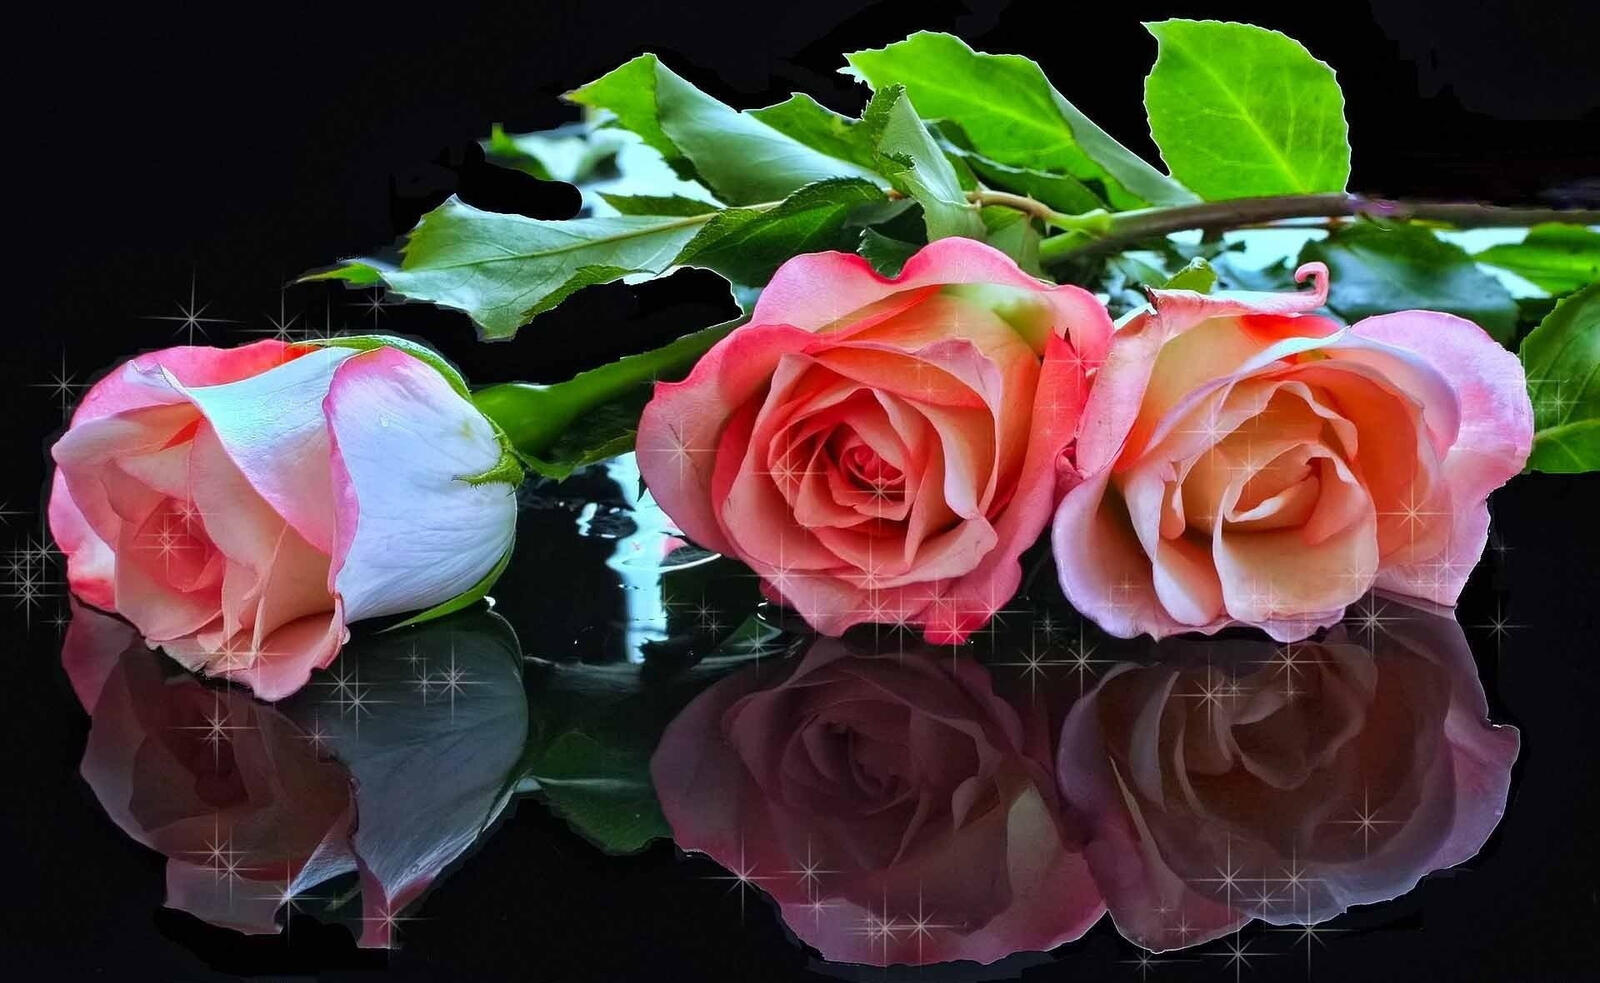 Free photo Roses lie on a glass surface